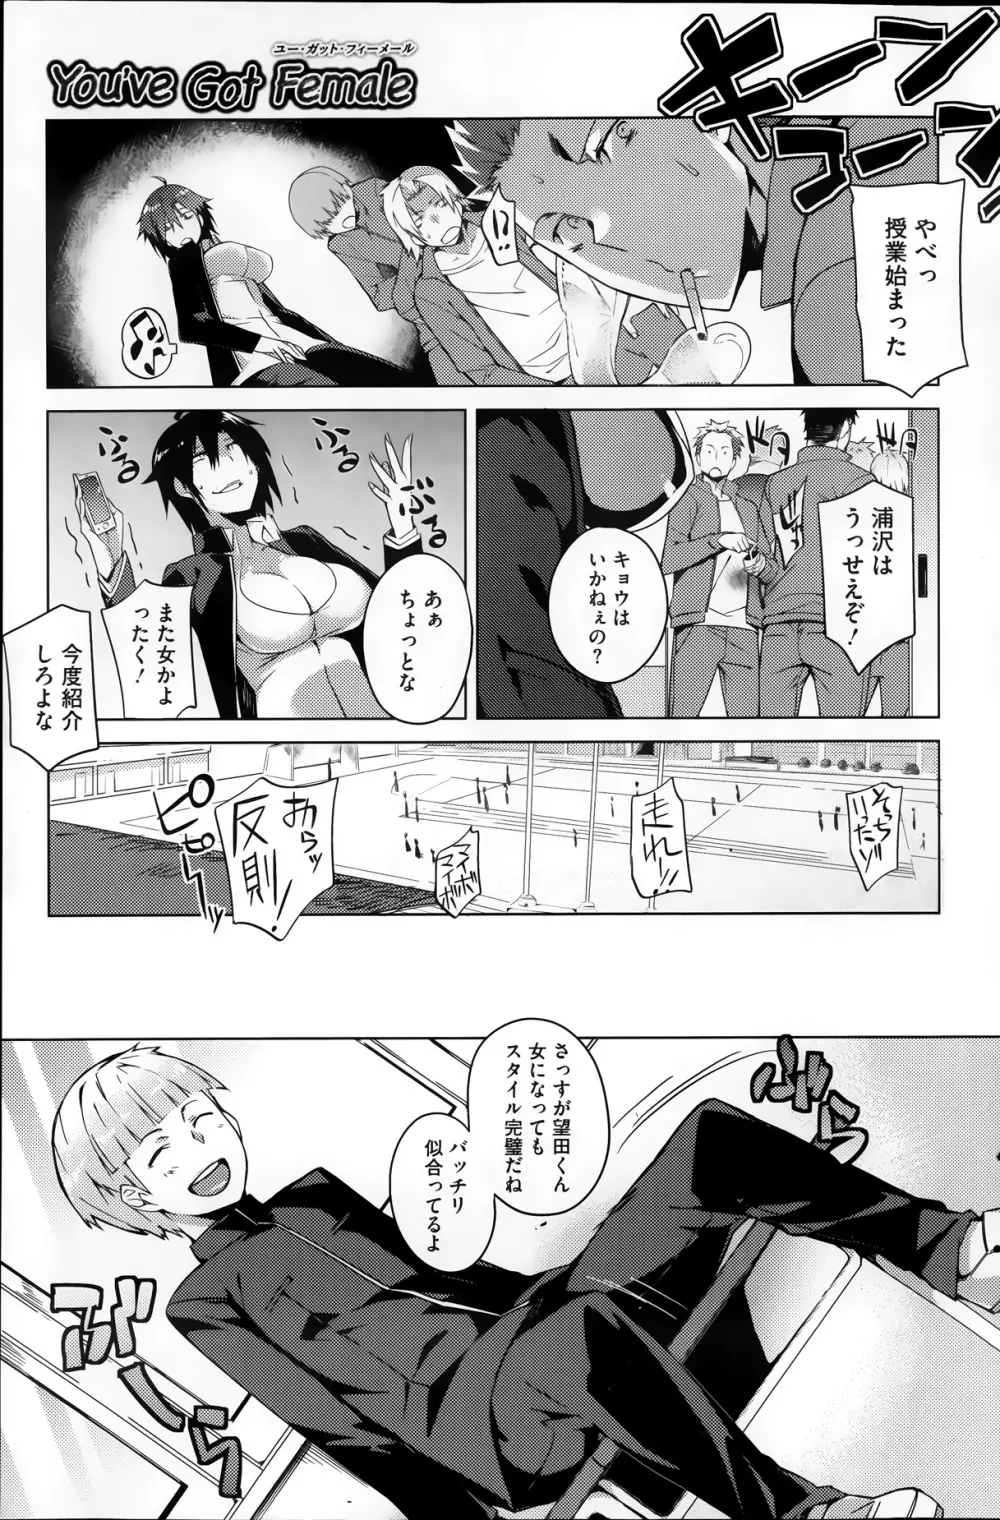 You've Got Female 第01-02話 Page.7